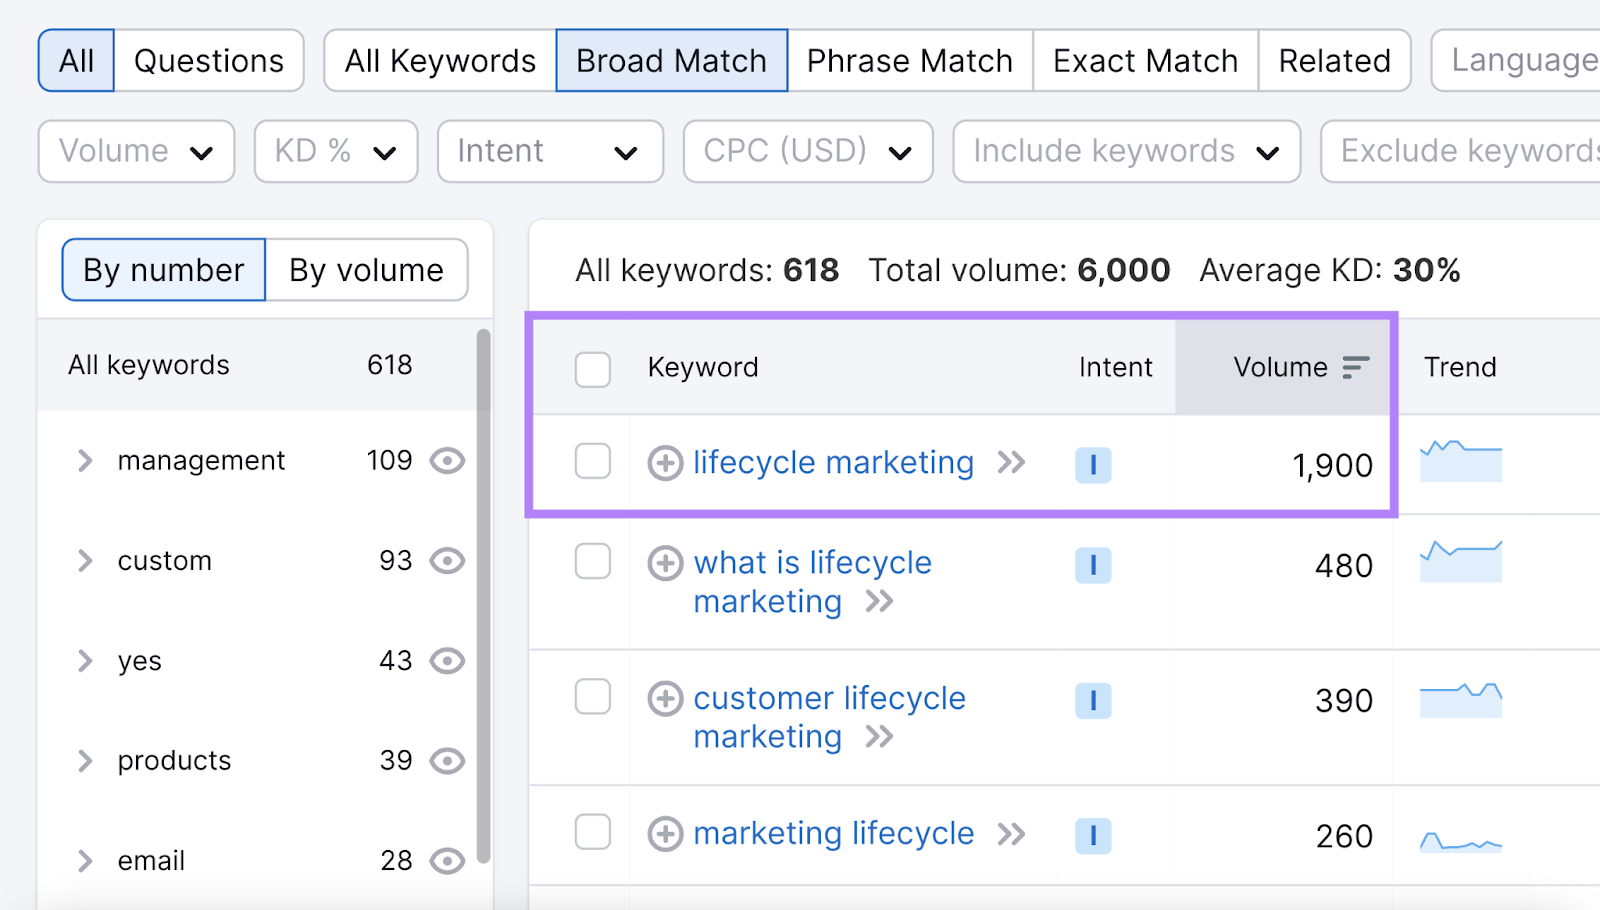 “lifecycle marketing" has the highest search volume on the list